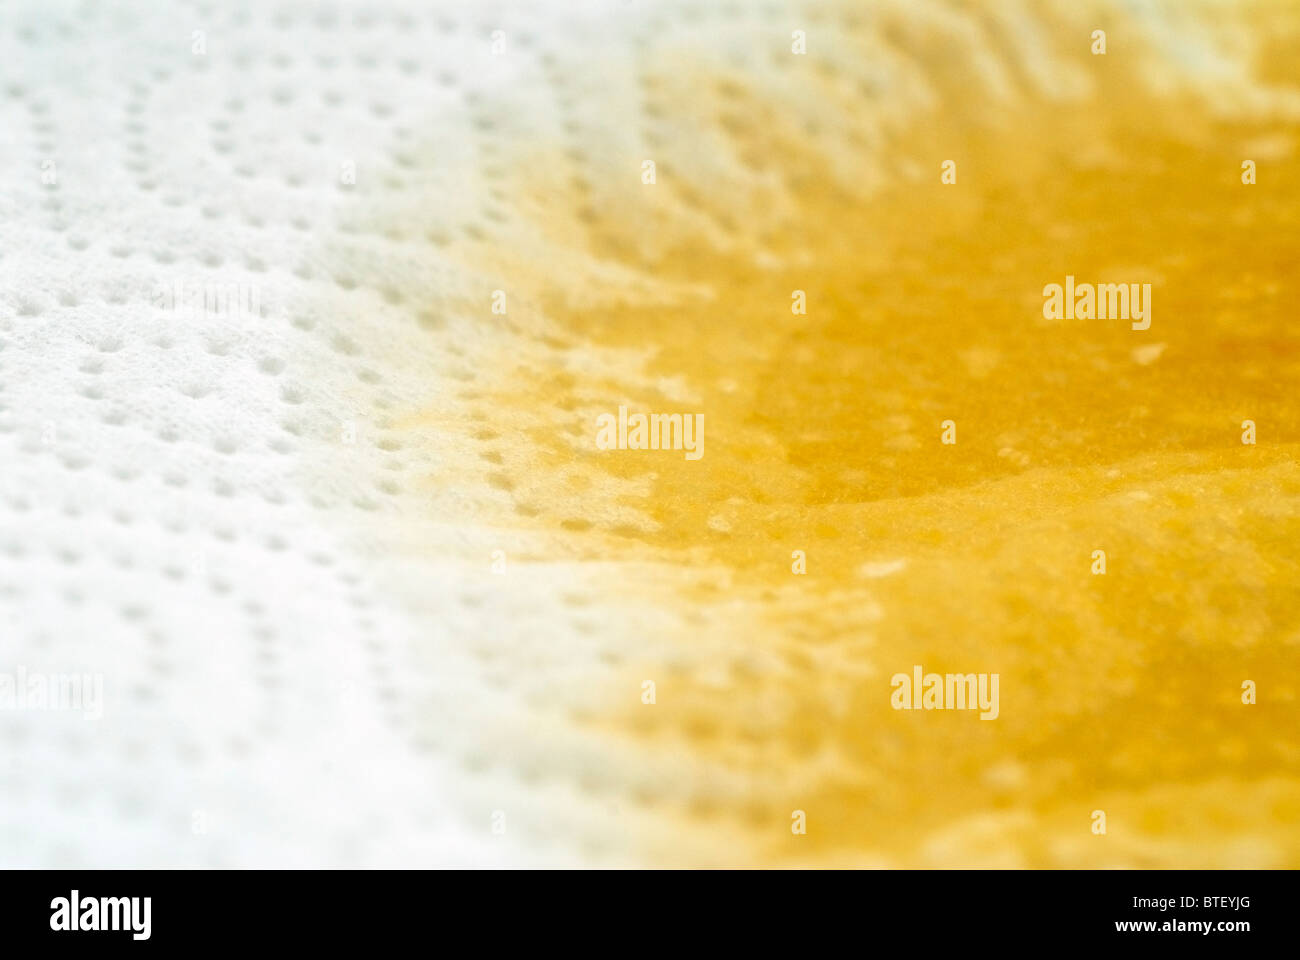 Paper Towel Spill Stock Photo